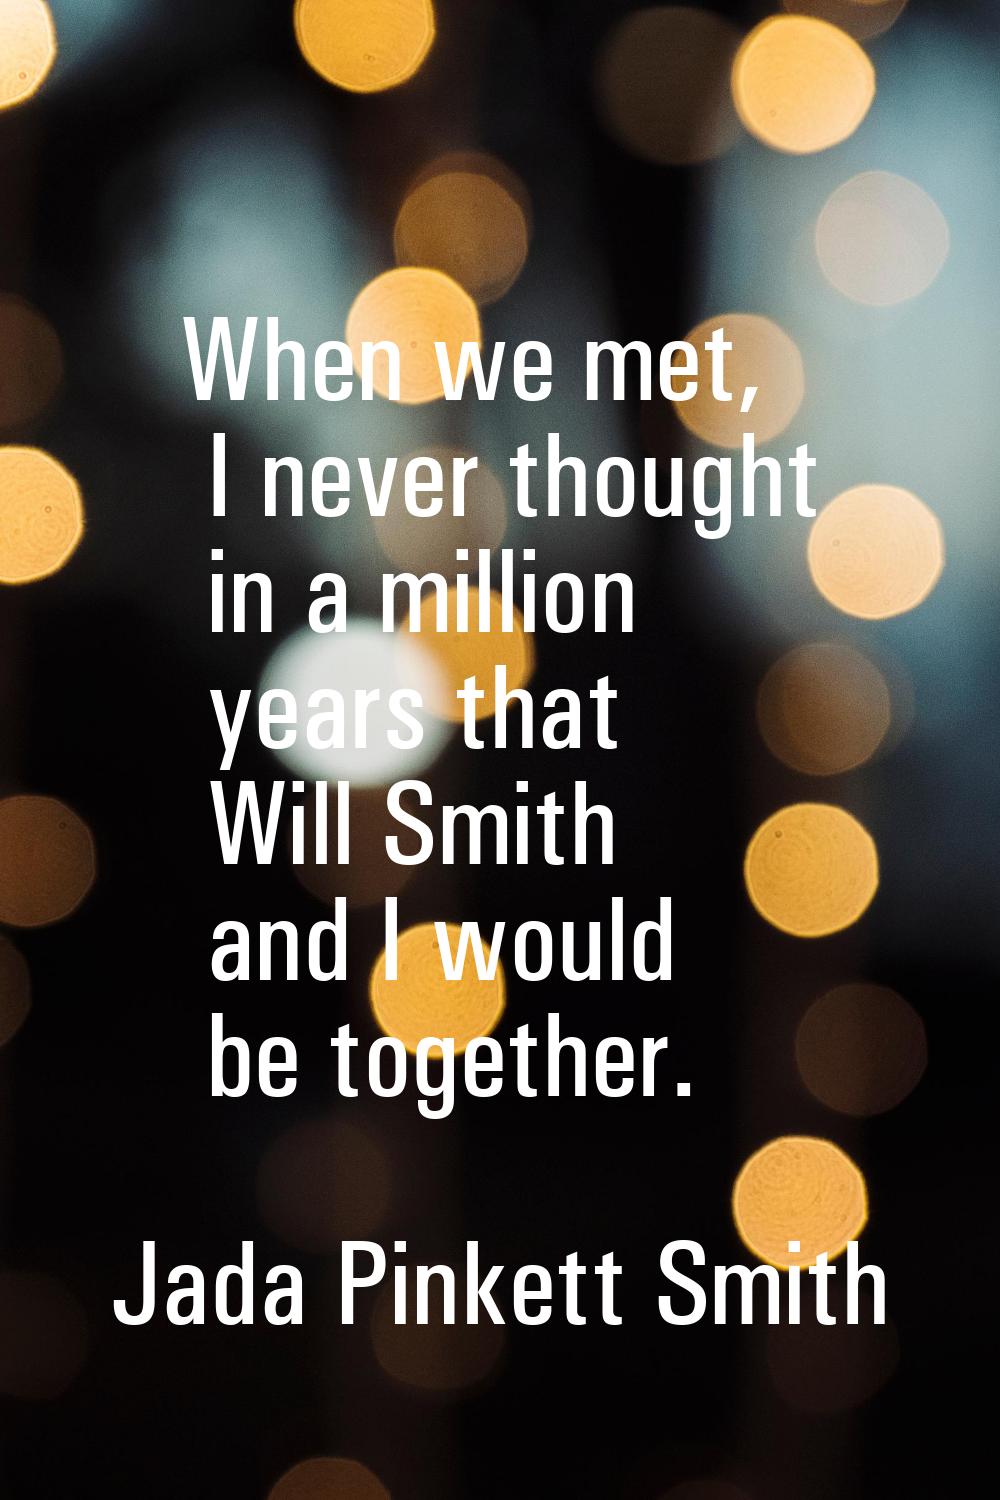 When we met, I never thought in a million years that Will Smith and I would be together.